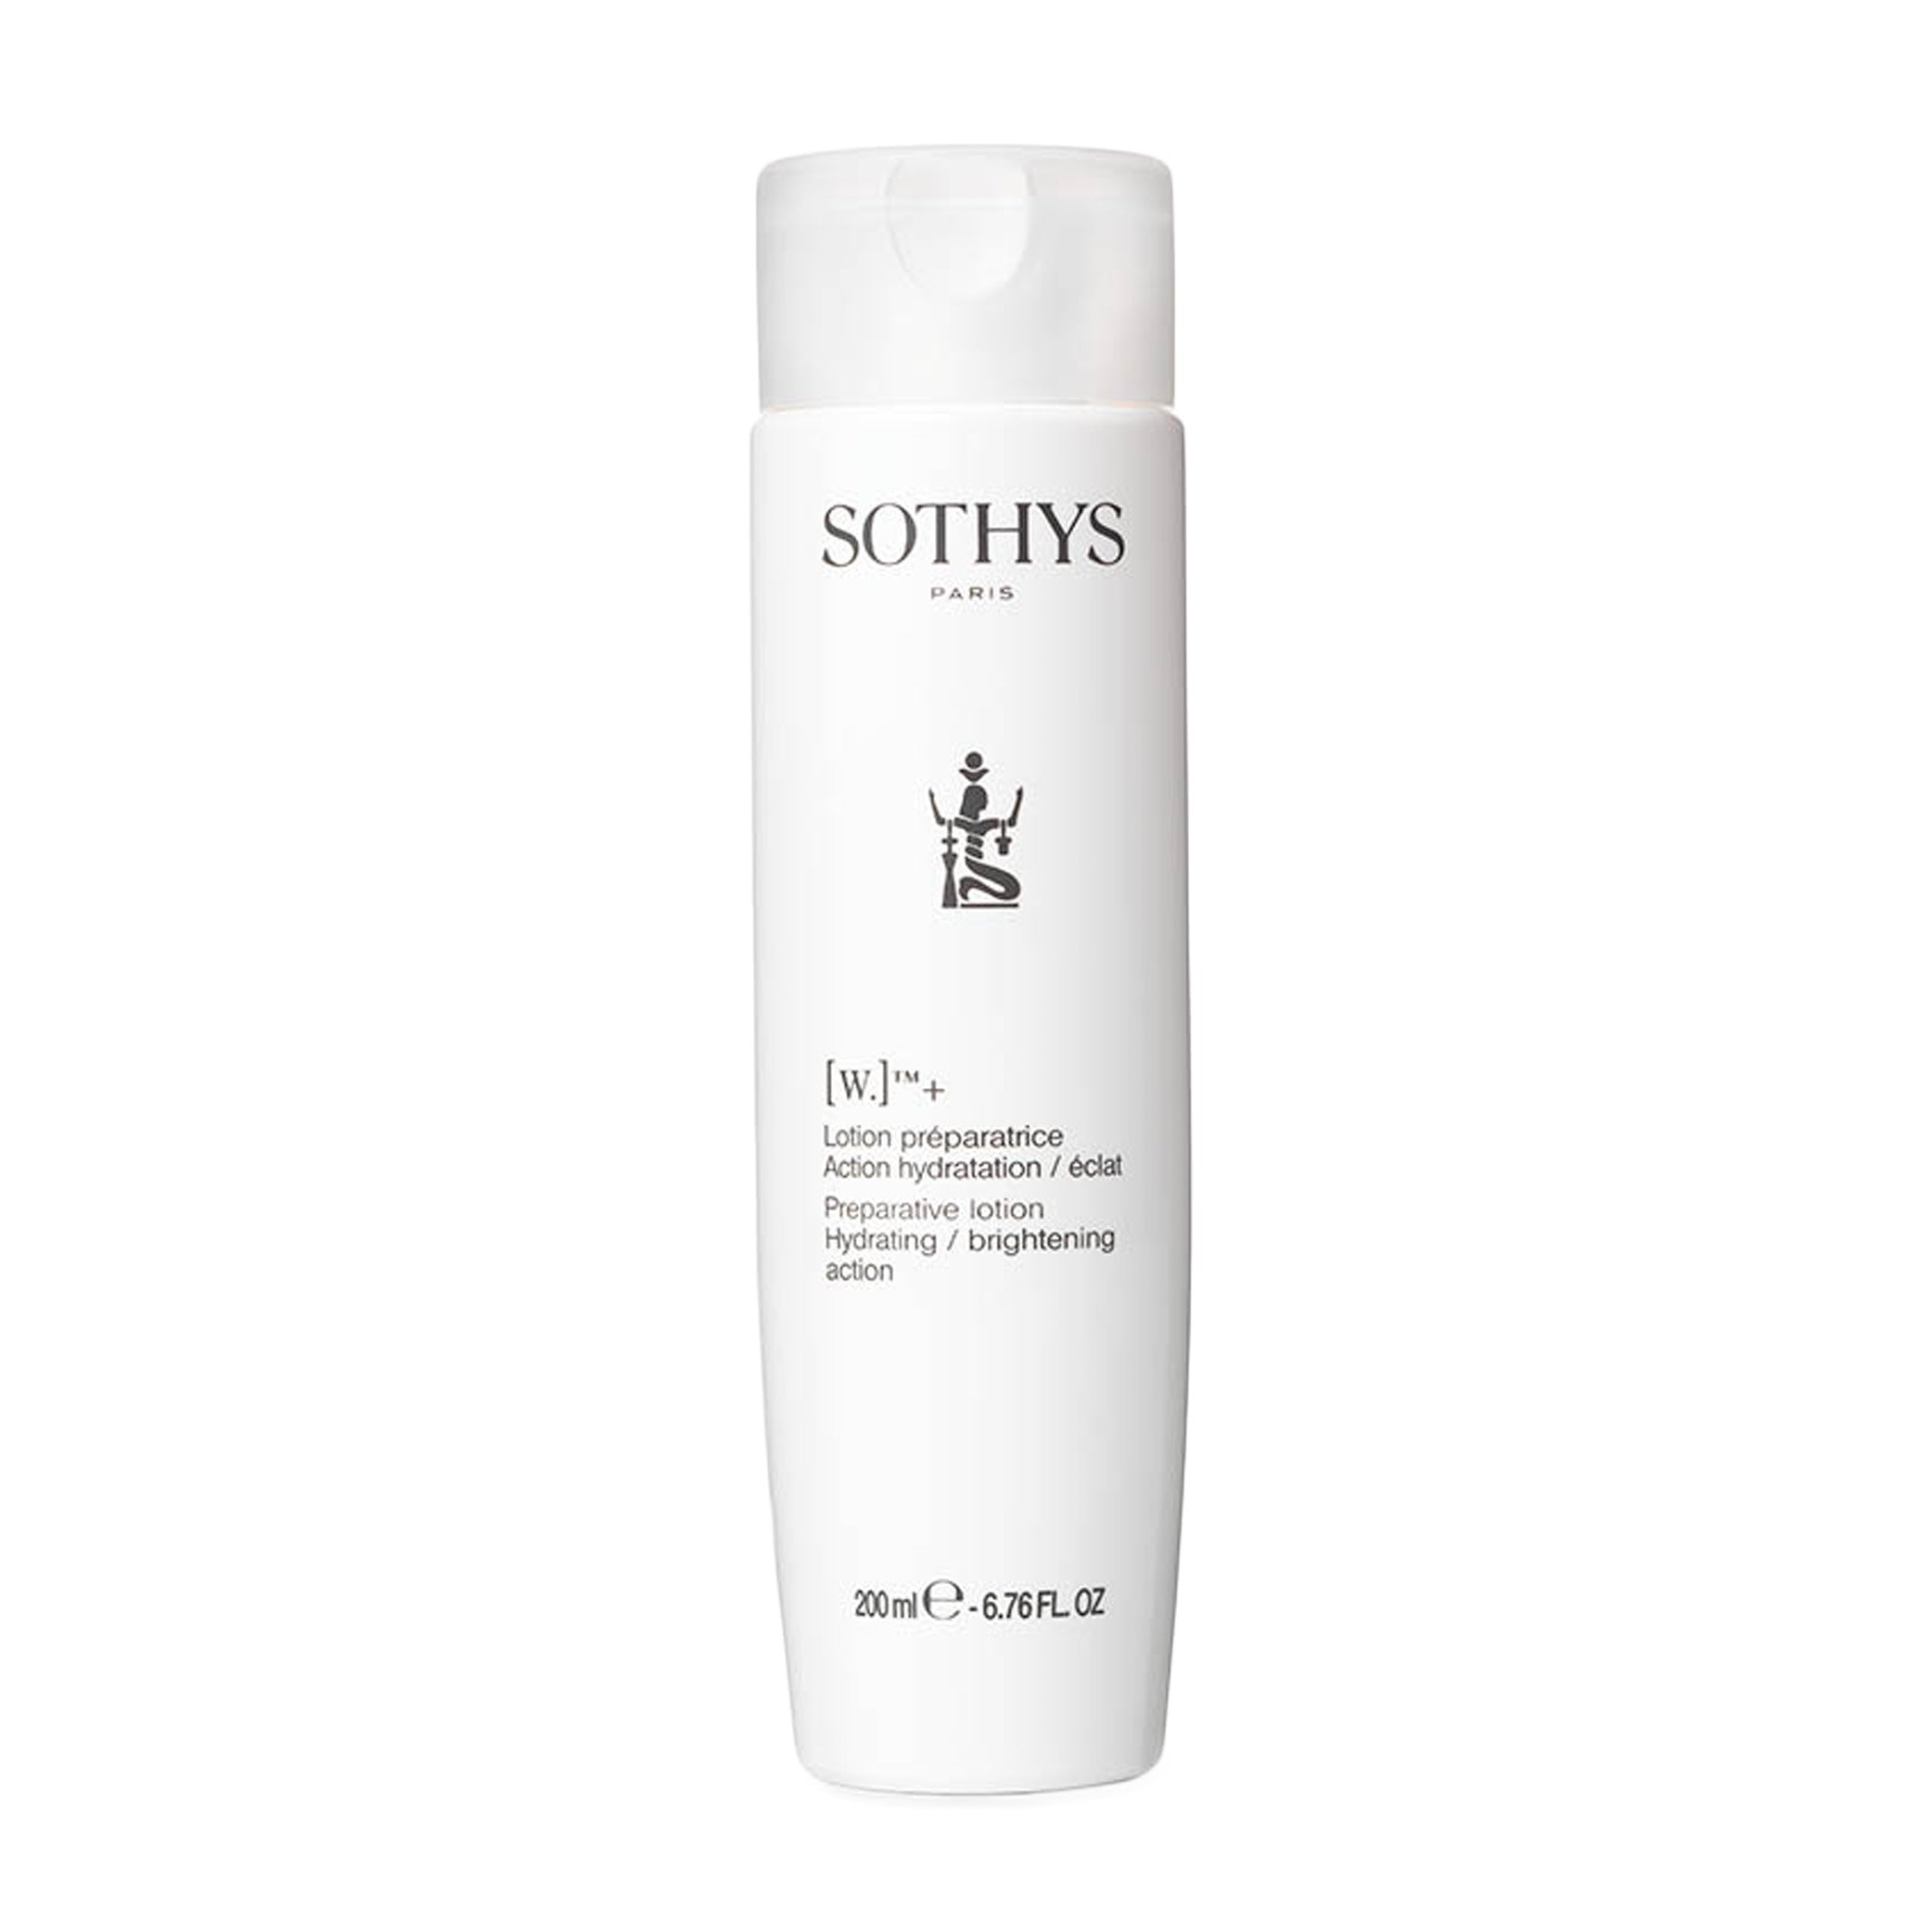 Preparative Lotion Hydrating / Brightening Action